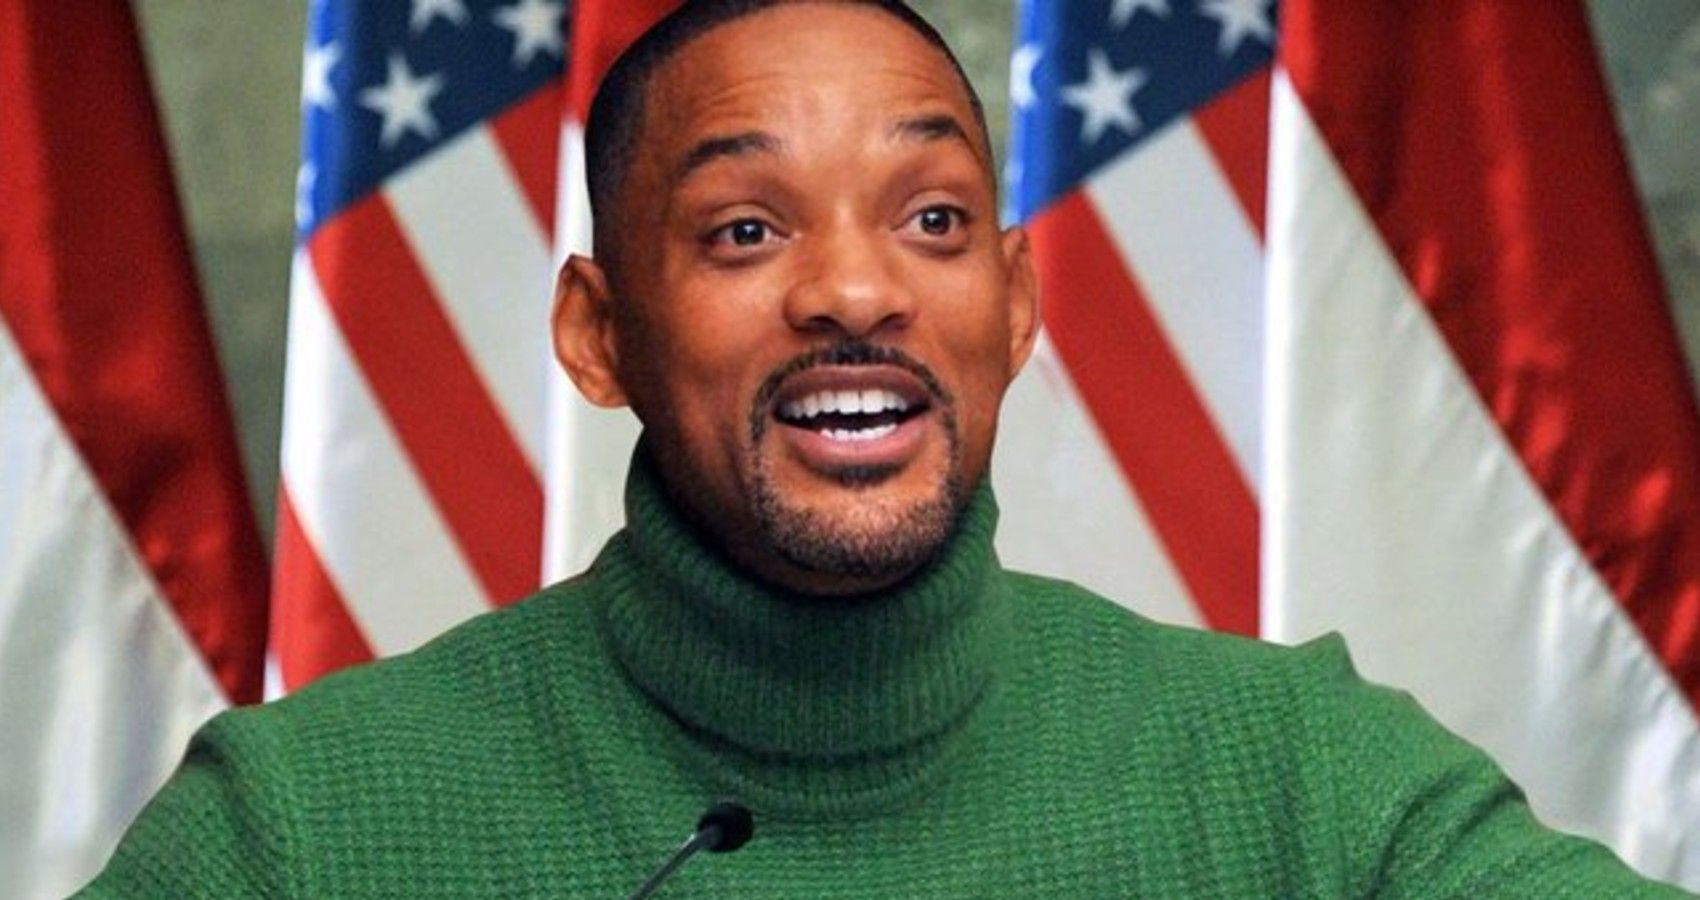 Will Smith in green sweater talking in front of American flags